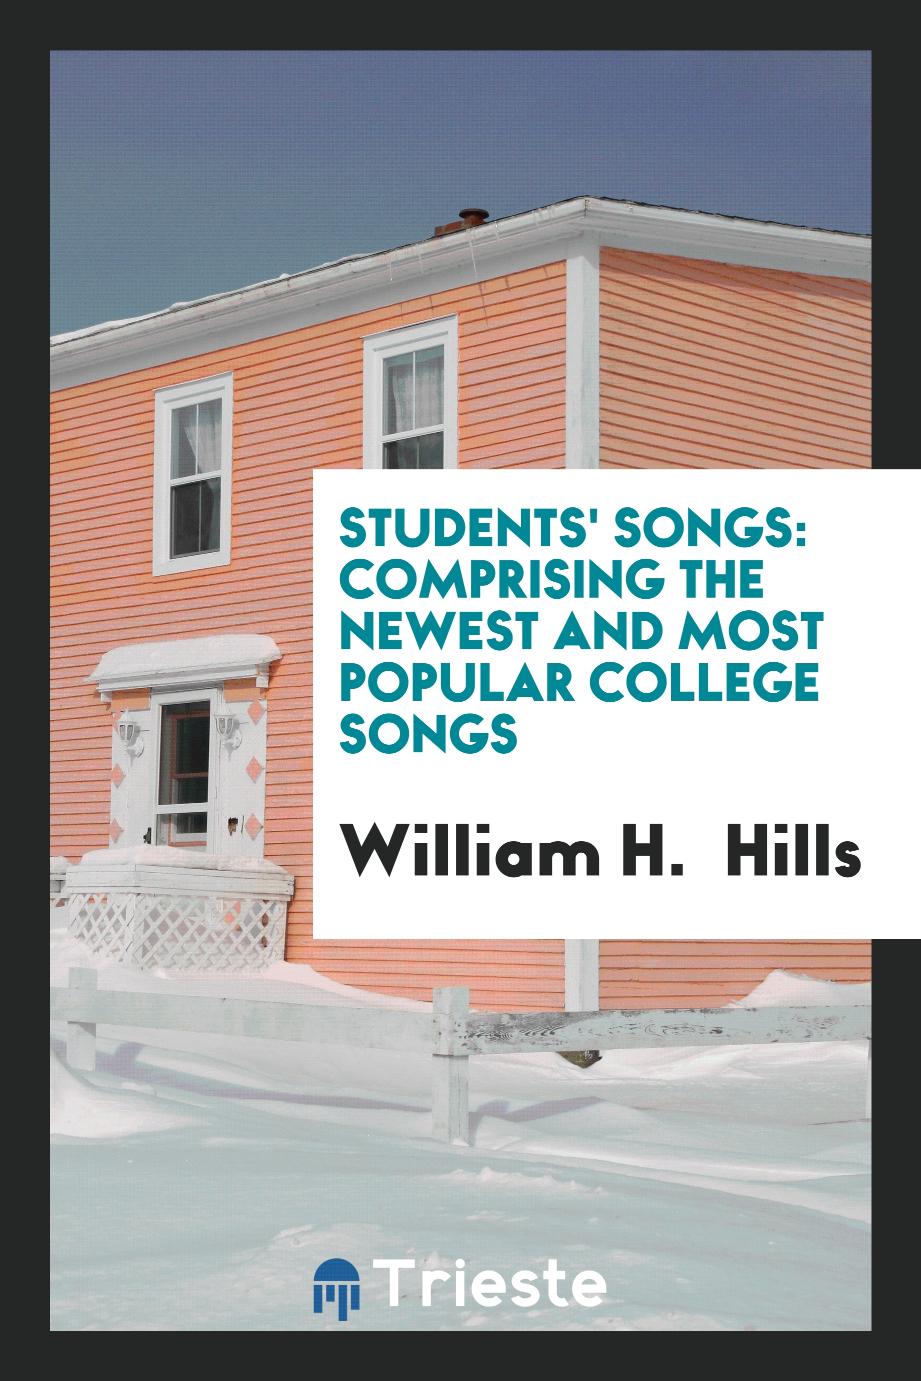 Students' Songs: Comprising the Newest and Most Popular College Songs